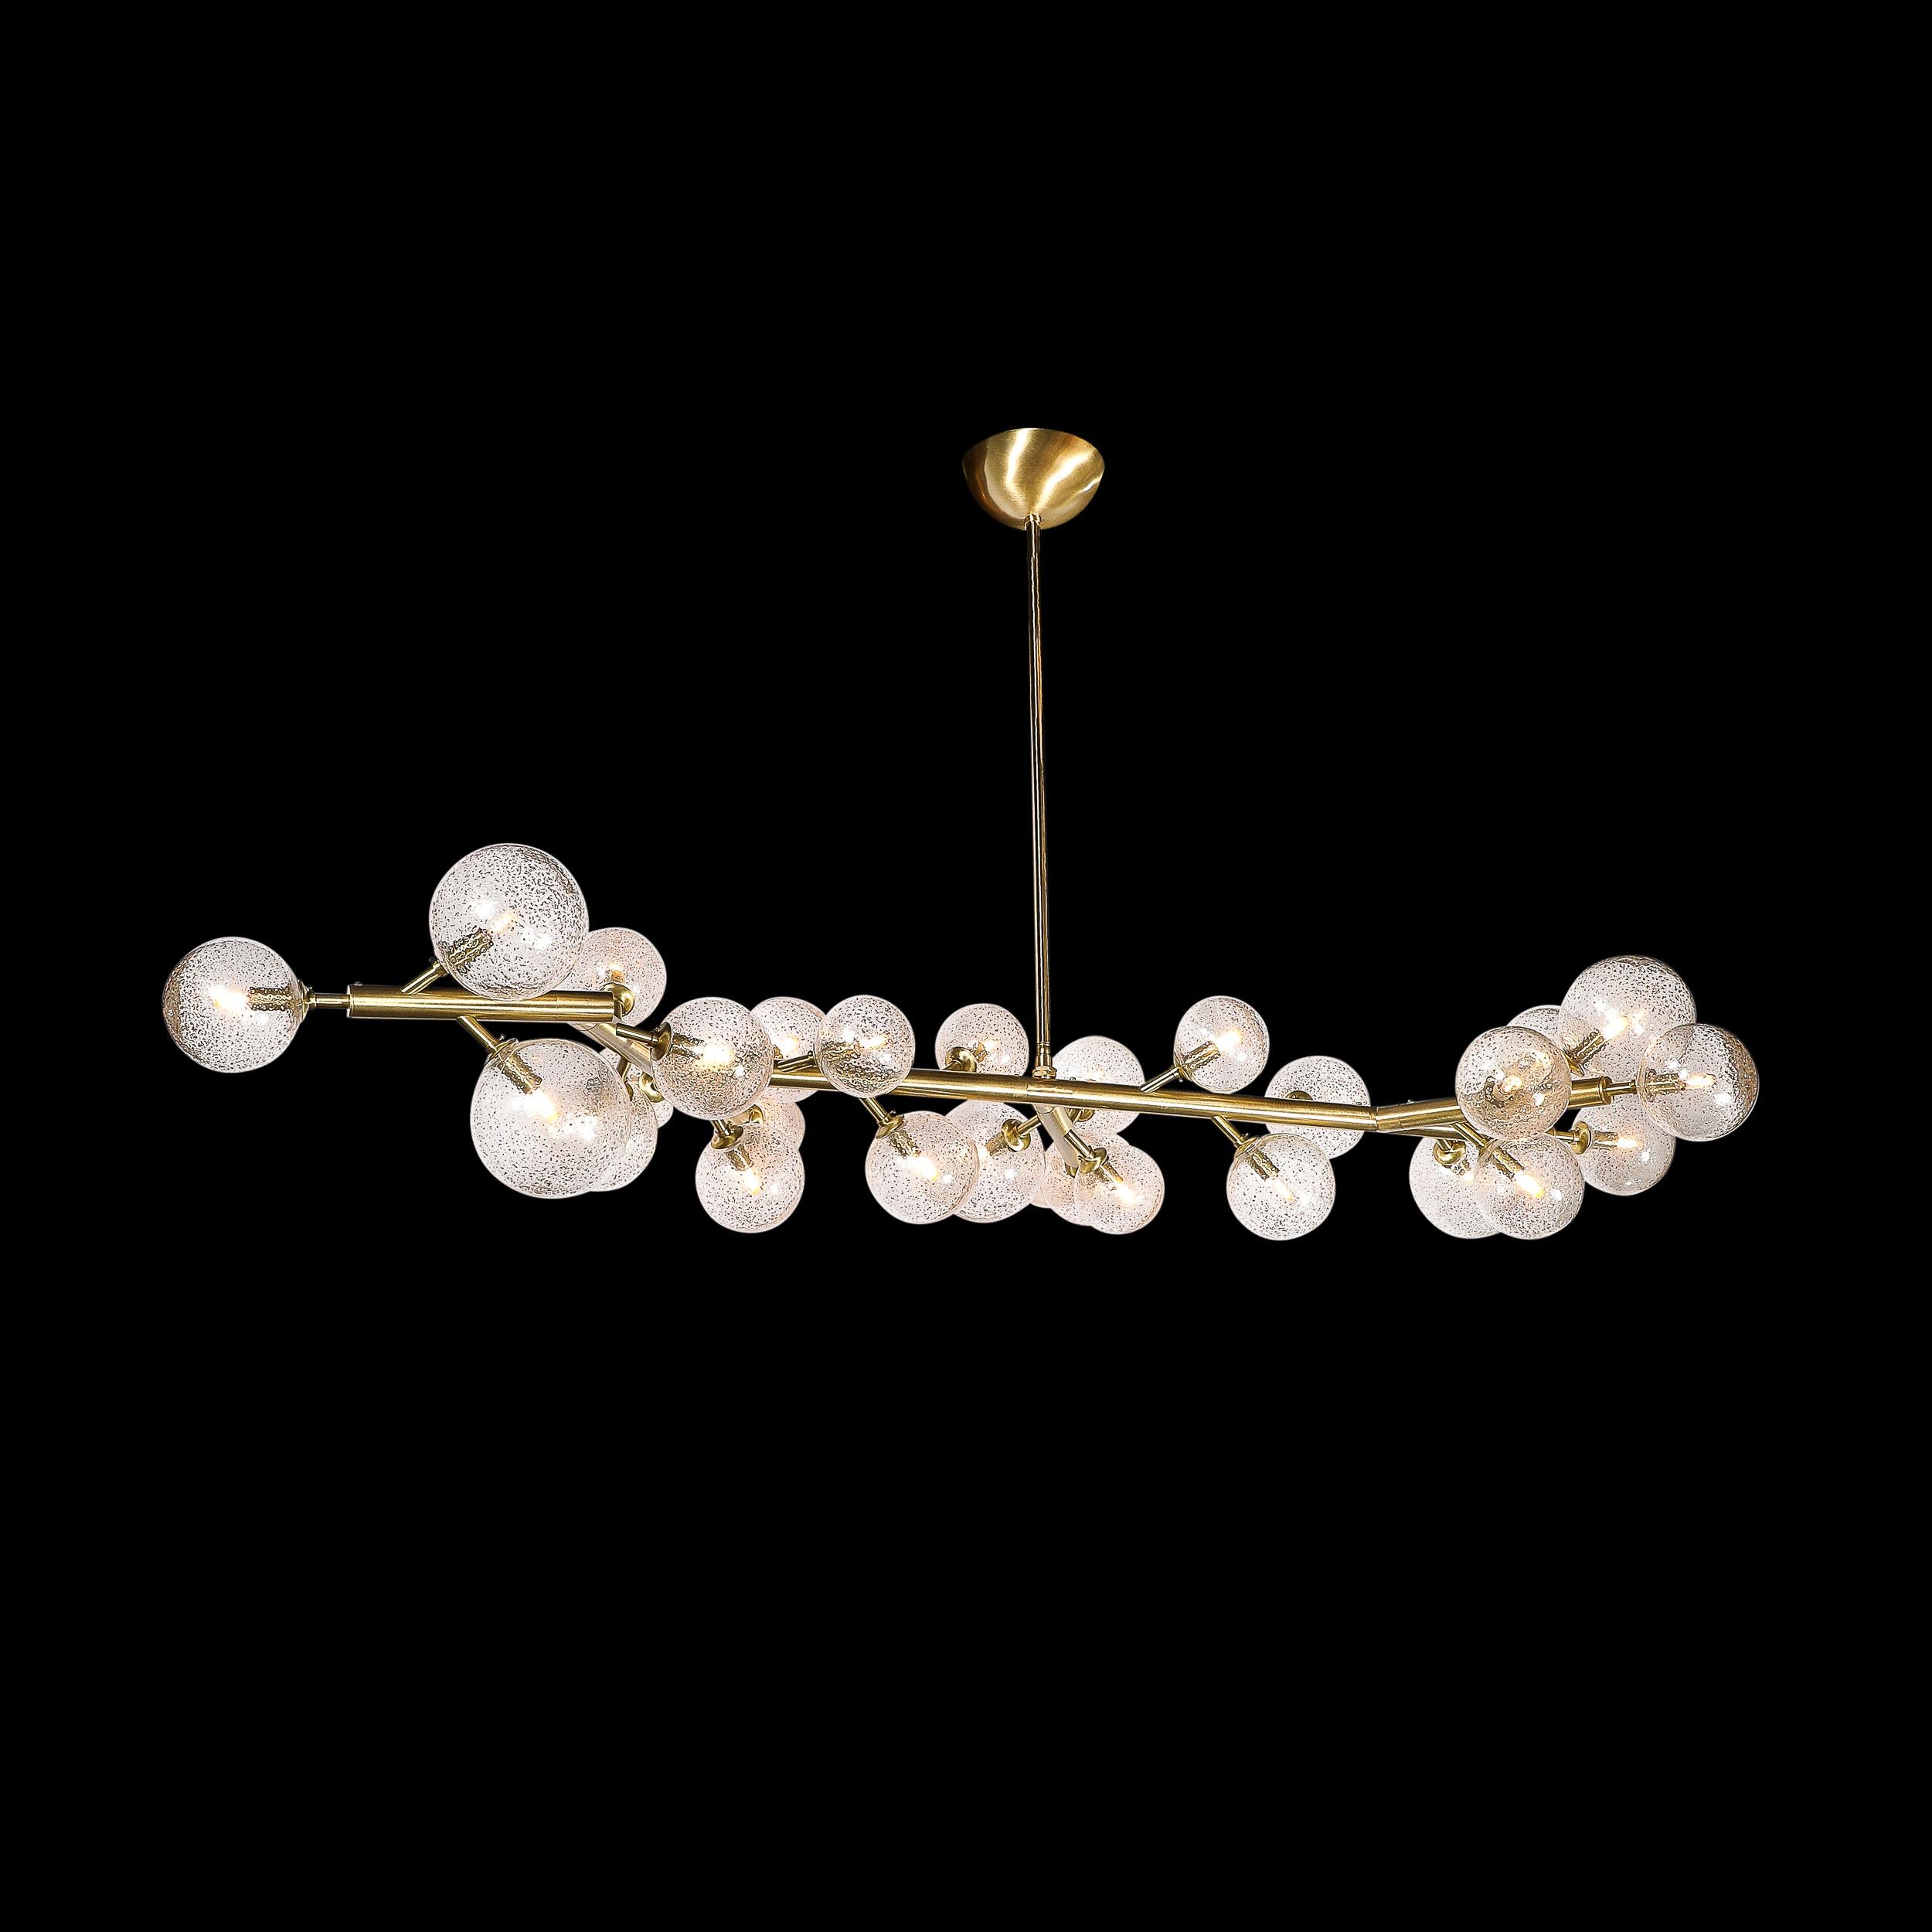 This stunningly elegant Custom Branch Form Hand-blown Murano Glass Chandelier in Transparent & 24Karat Gold Flecks & Brushed Brass Fittings originates from Italy during the 21st Century. Features an elongated branch form composition in a brushed